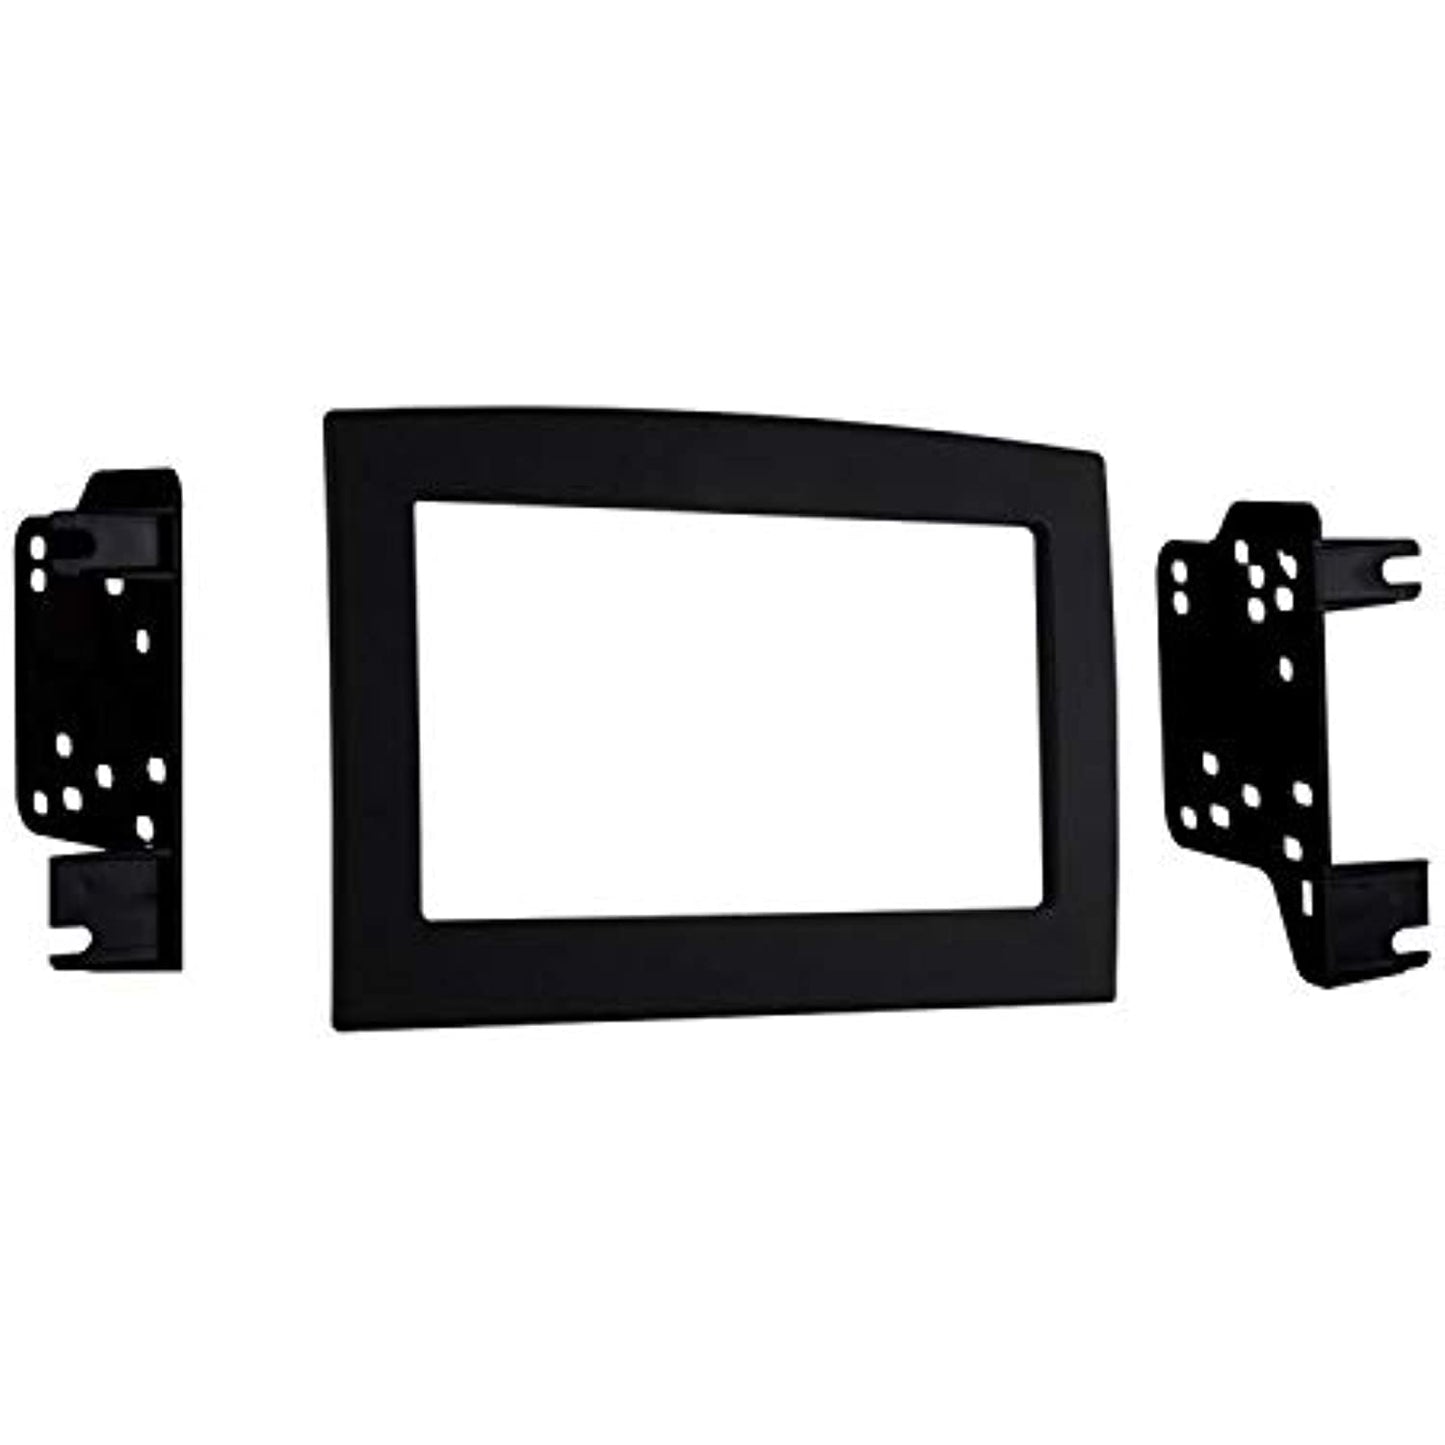 PAC C2R-CHY4 Radio Replacement Interface for Chrysler,Blue,8.75in. x 9.00in. x 2.00in. & Metra 95-6528B Double Din Dash Kit for 2006-2010 Dodge Ram (Black)